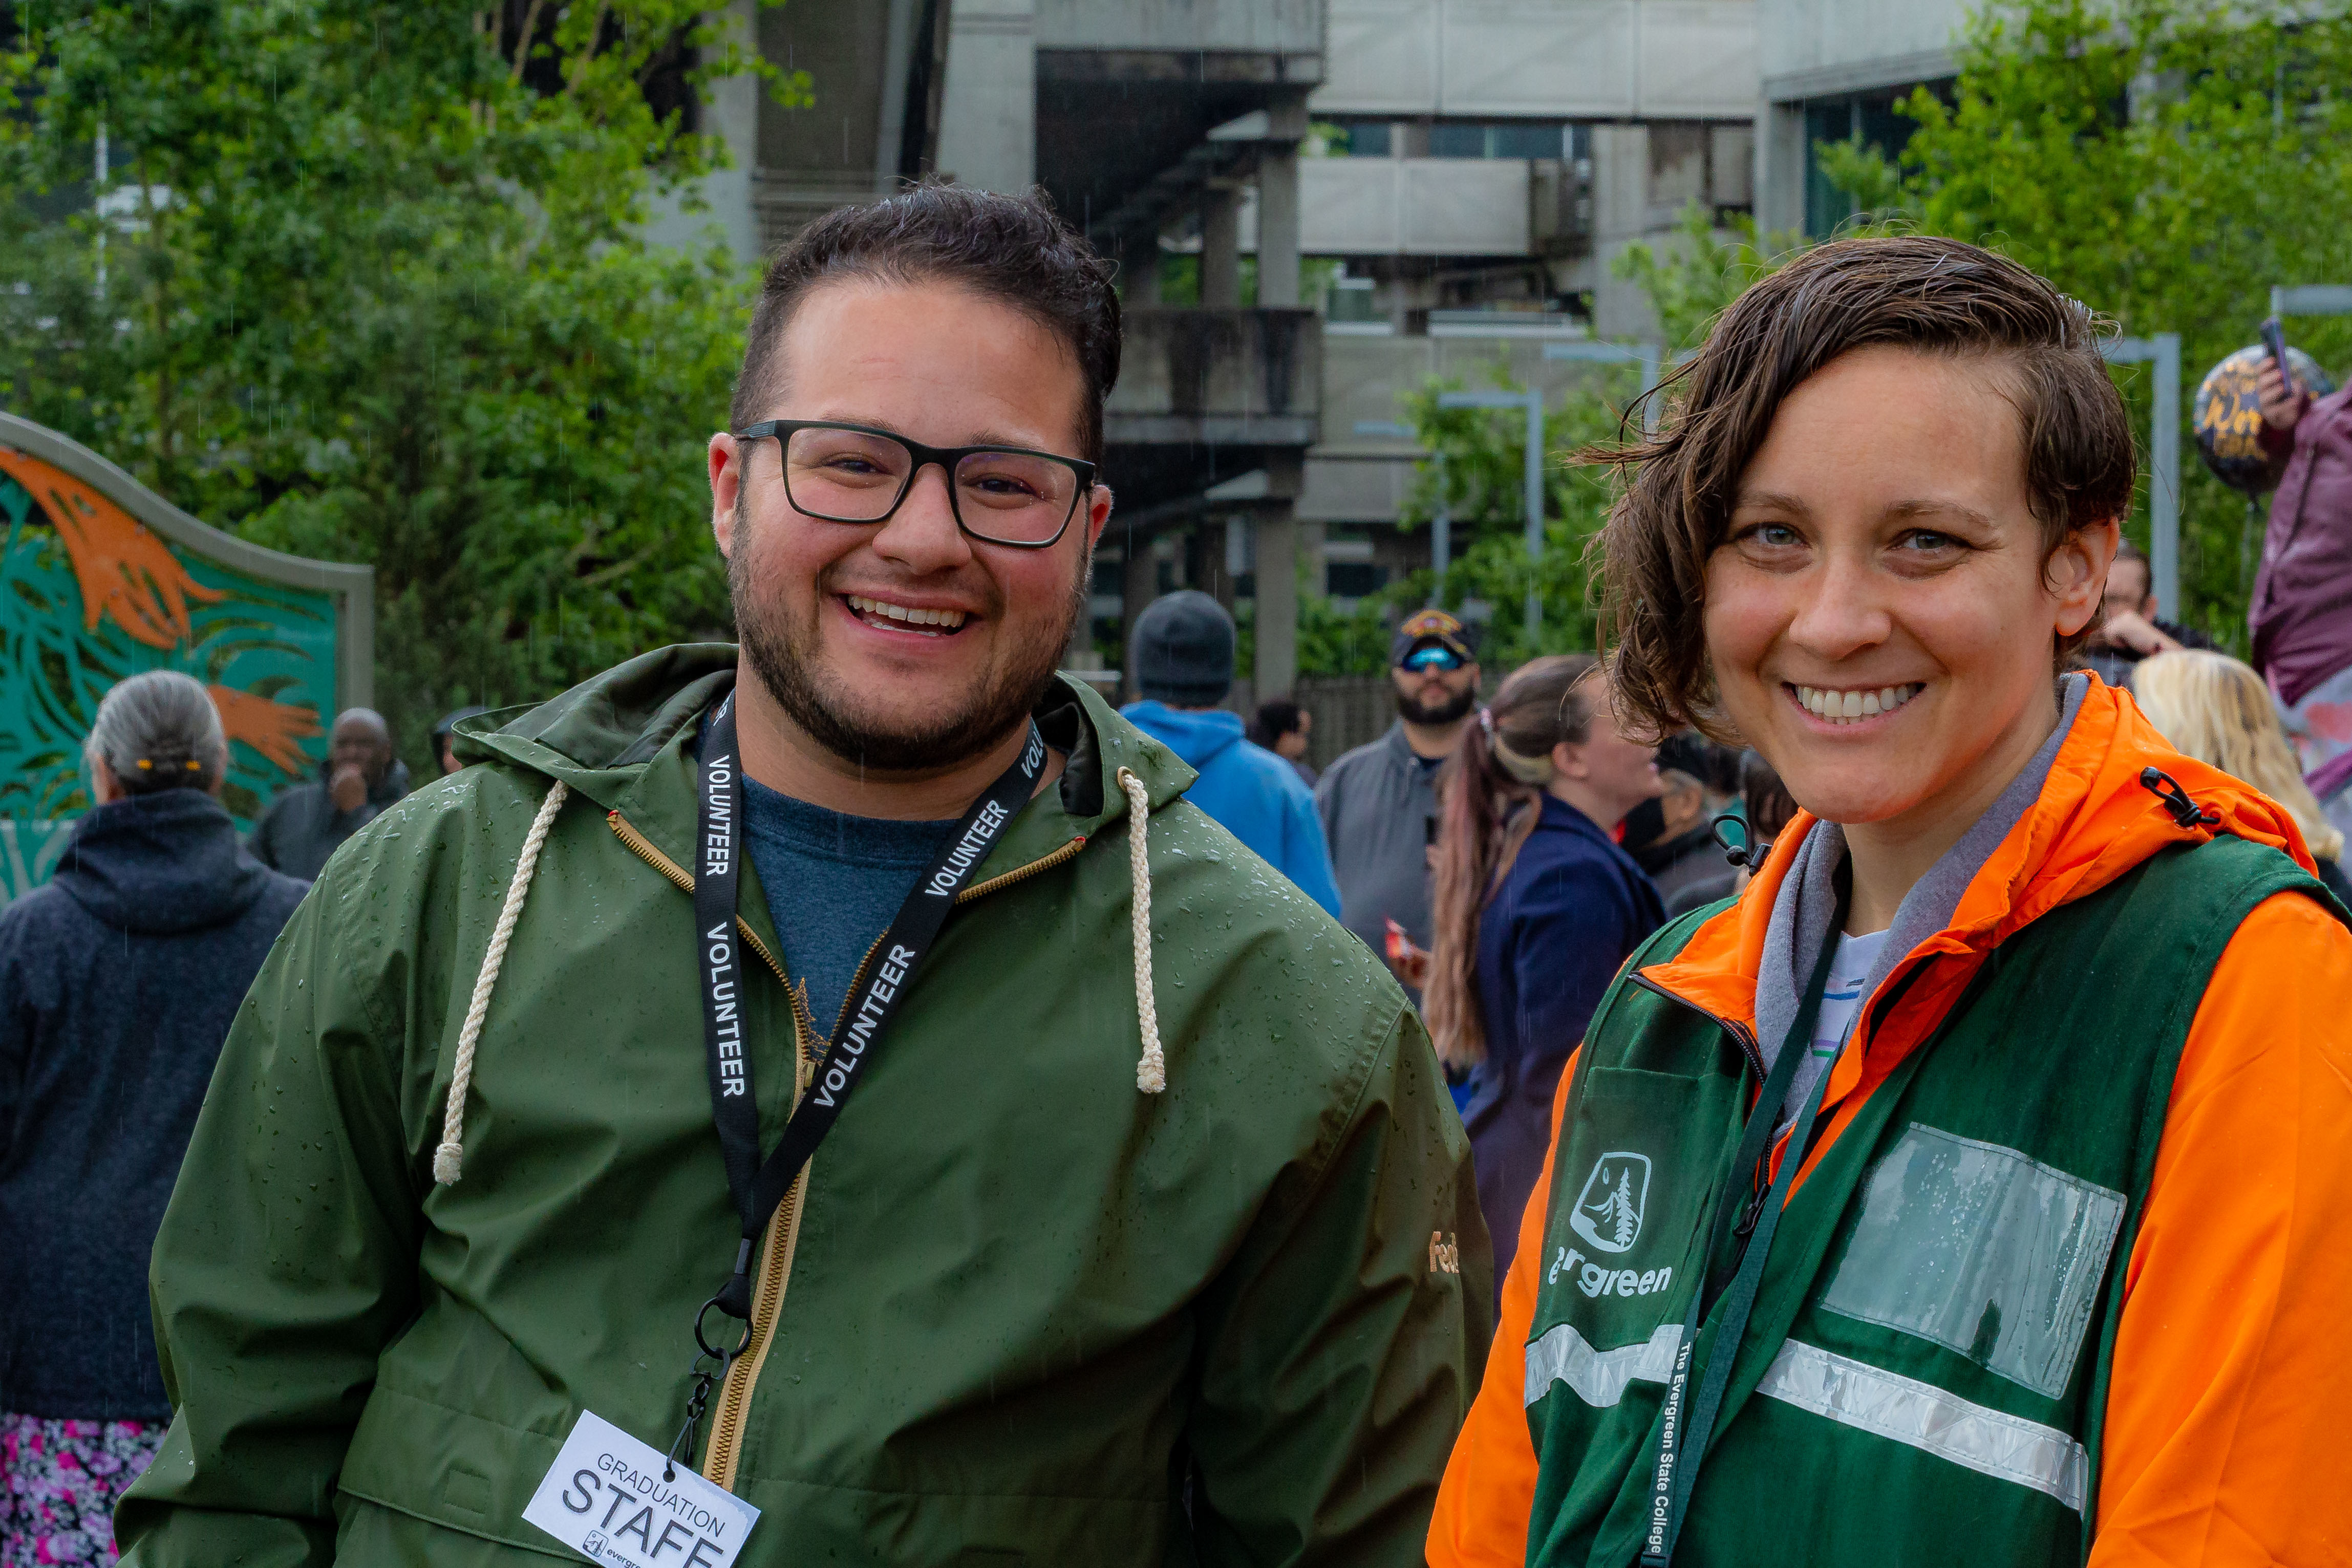 Two staff members smiling outside. One with green jacket. The other with green vest and orange jacket underneath.